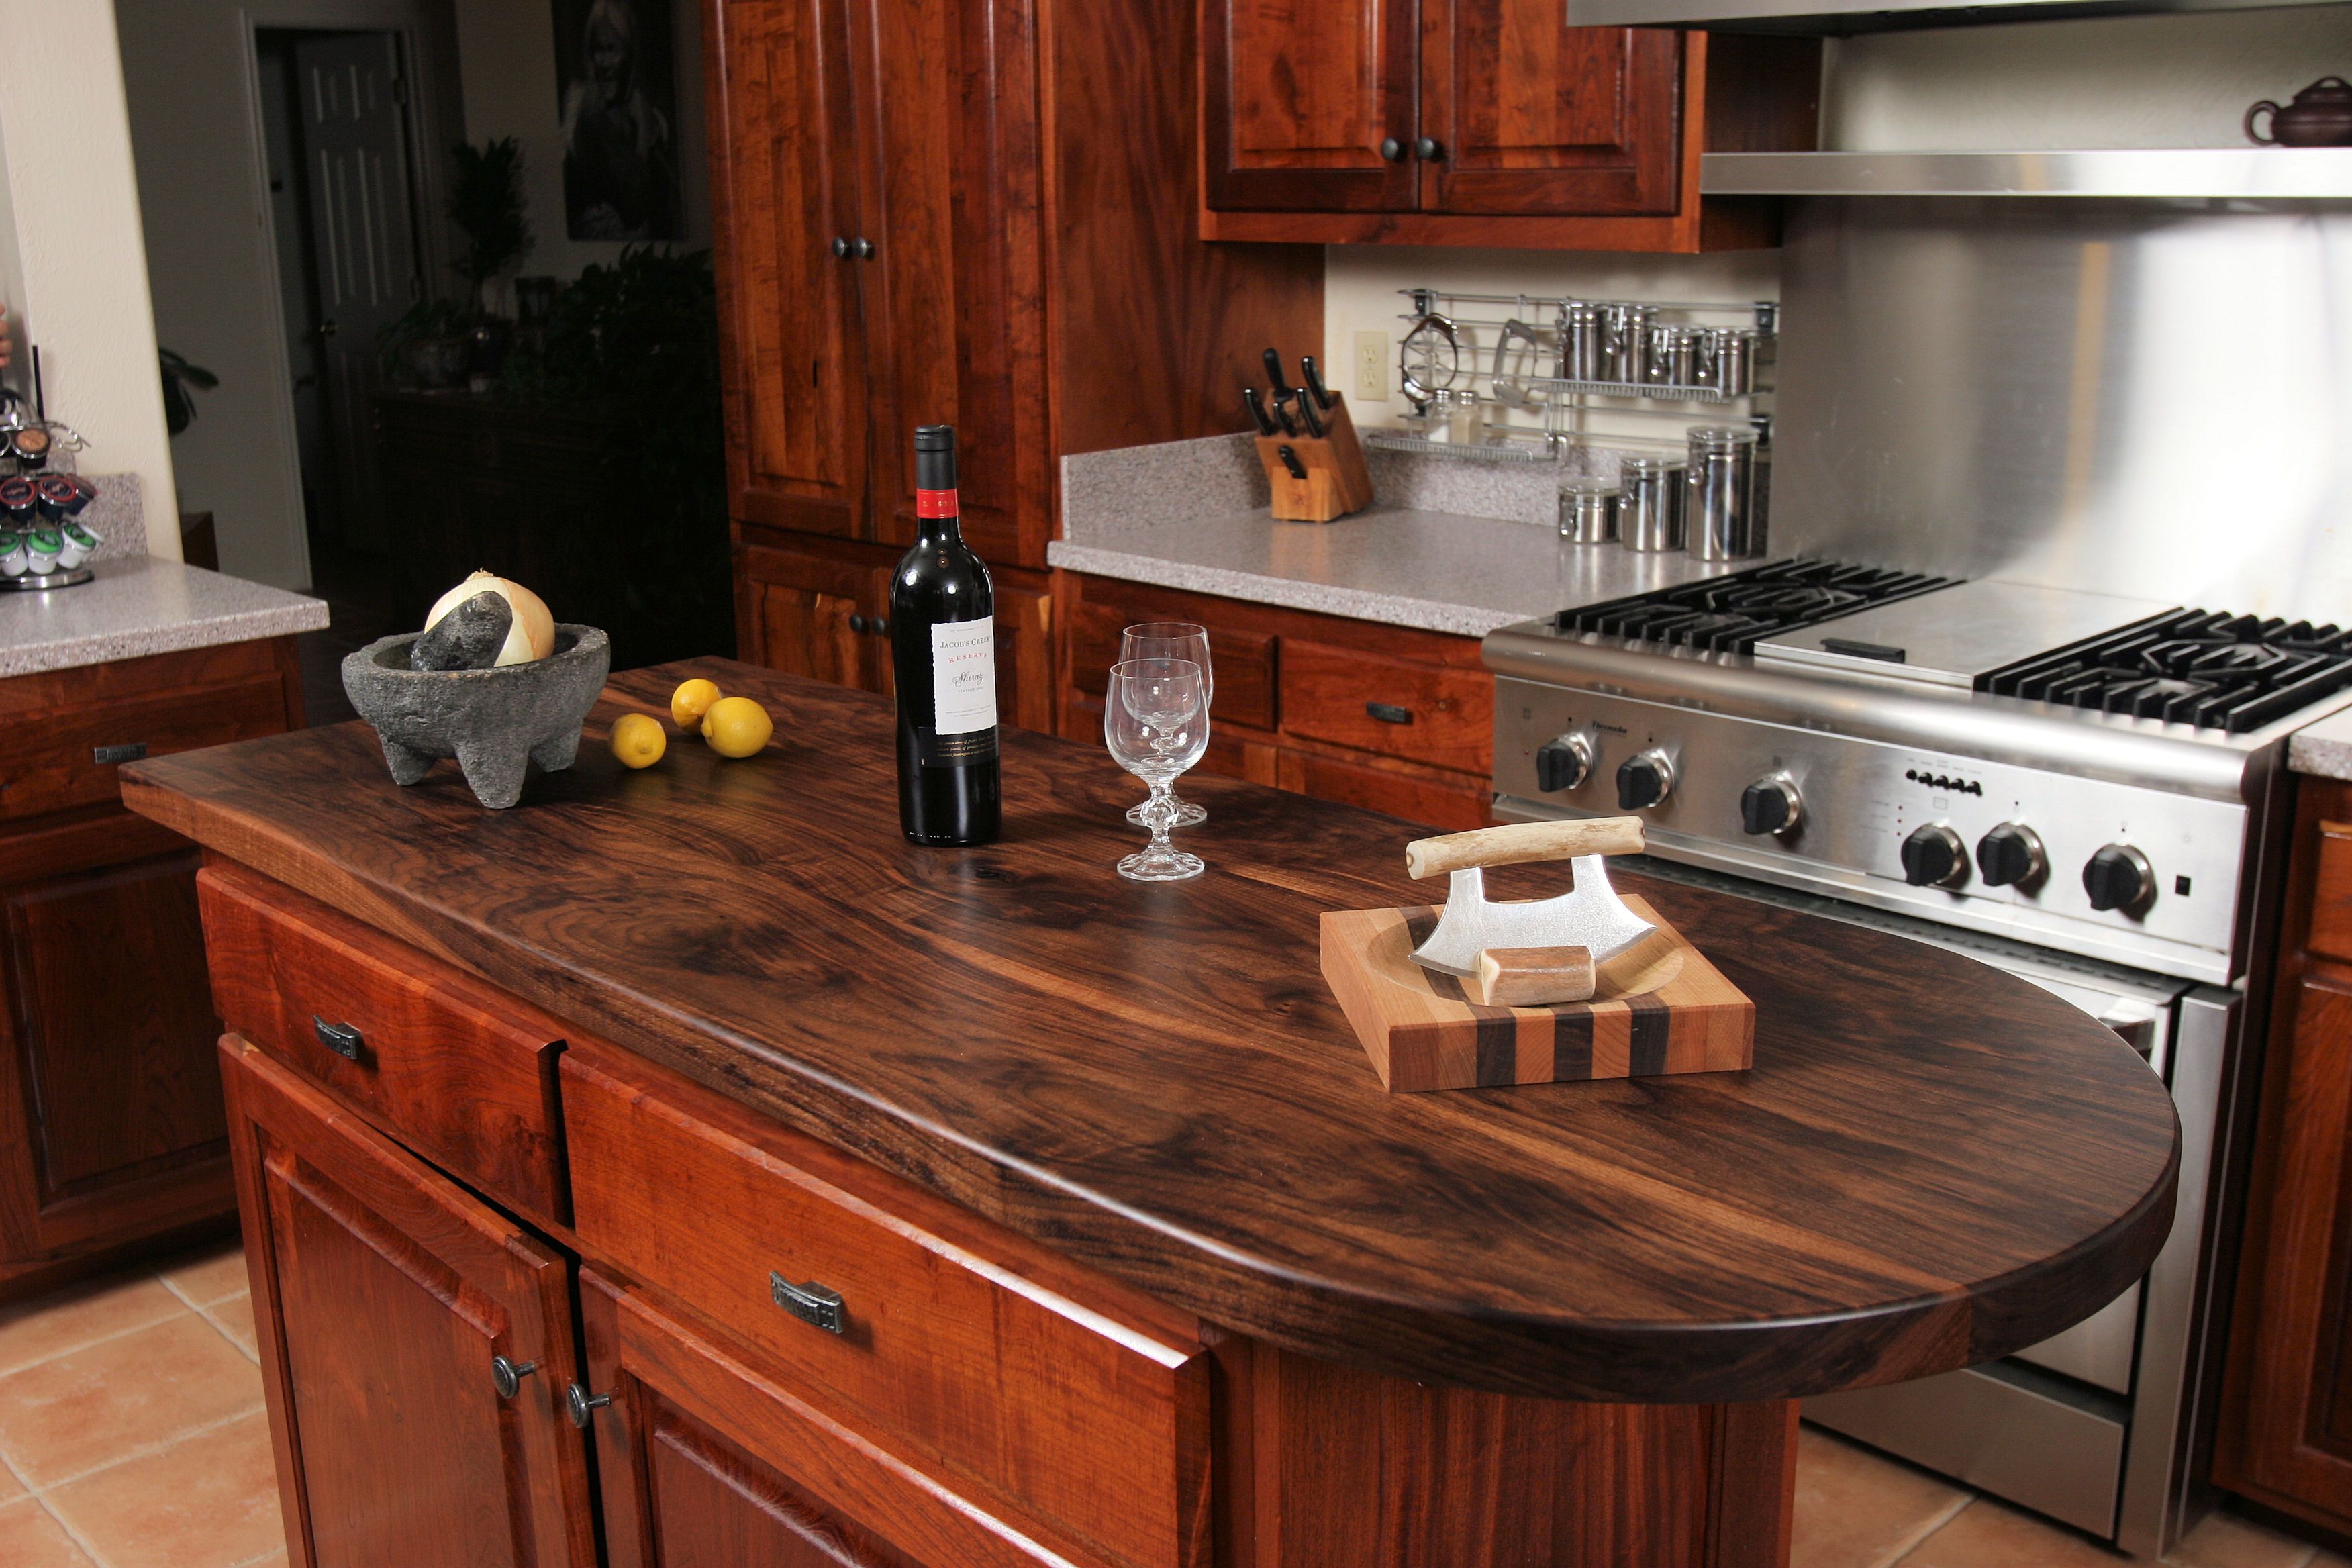 Custom Wood Countertop Options Finishes, Red Oak Kitchen Countertops